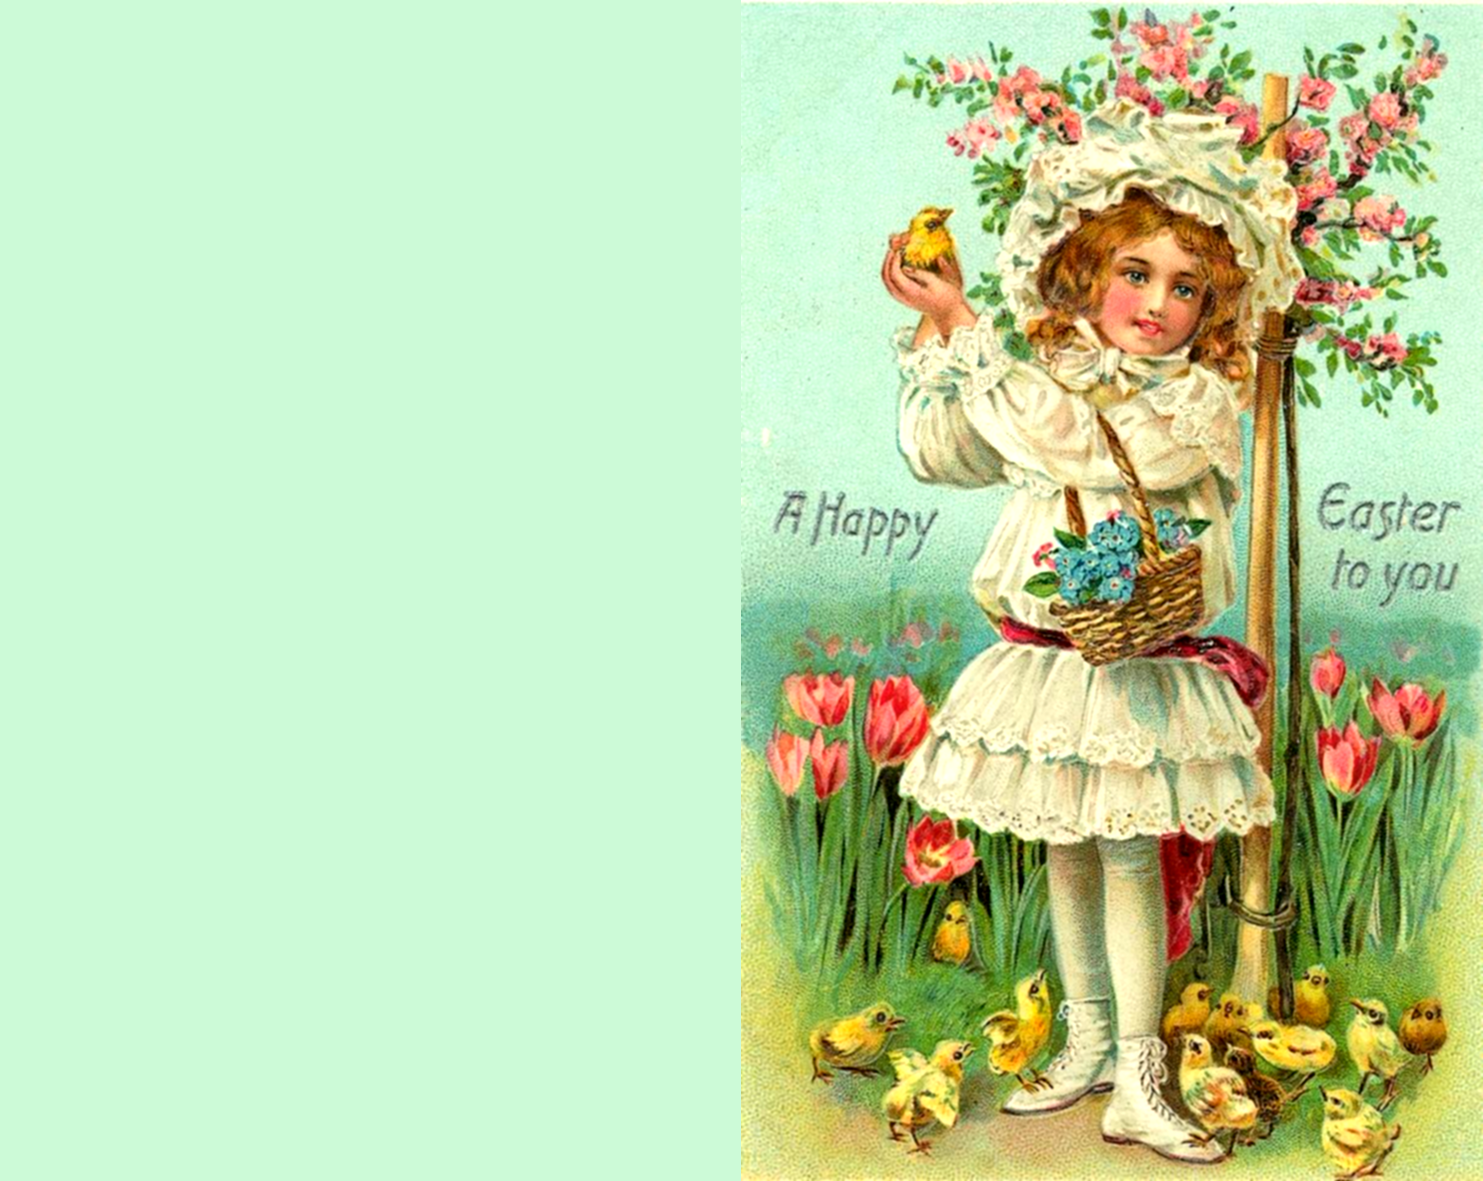 Old vintage Easter greeing card with little girl, flowers and chickens.